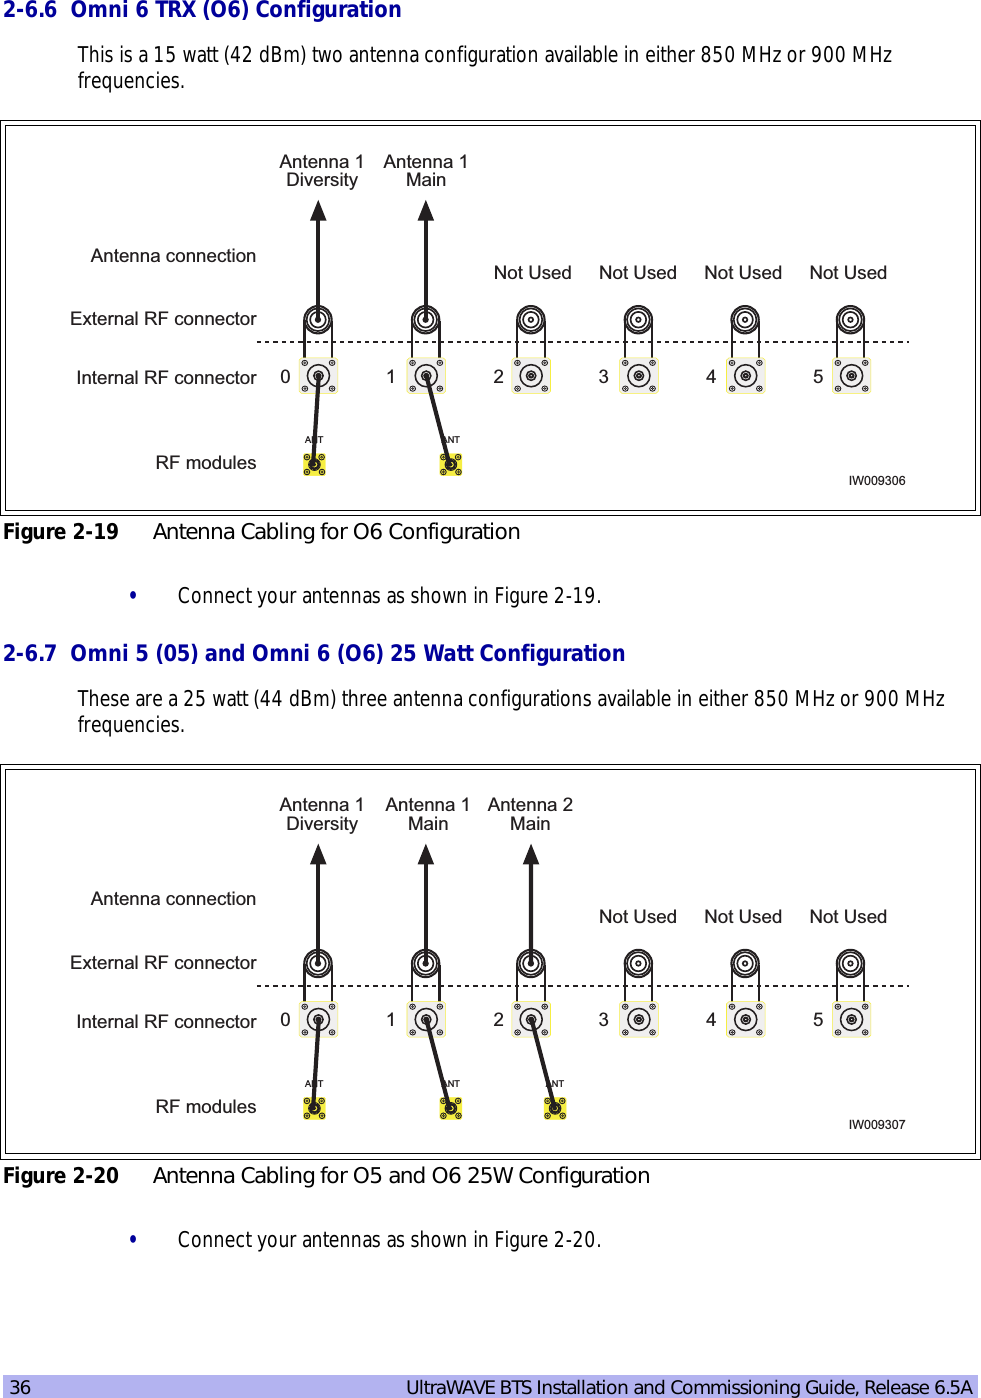 36   UltraWAVE BTS Installation and Commissioning Guide, Release 6.5A2-6.6  Omni 6 TRX (O6) ConfigurationThis is a 15 watt (42 dBm) two antenna configuration available in either 850 MHz or 900 MHz frequencies.•Connect your antennas as shown in Figure 2-19.2-6.7  Omni 5 (05) and Omni 6 (O6) 25 Watt ConfigurationThese are a 25 watt (44 dBm) three antenna configurations available in either 850 MHz or 900 MHz frequencies.•Connect your antennas as shown in Figure 2-20.Figure 2-19 Antenna Cabling for O6 ConfigurationFigure 2-20 Antenna Cabling for O5 and O6 25W ConfigurationANTRF modulesIW009306Internal RF connectorExternal RF connectorAntenna 1DiversityAntenna connection1 2 3 4 50Not UsedNot Used Not Used Not UsedAntenna 1MainANTANTRF modulesIW009307Internal RF connectorExternal RF connectorAntenna 1DiversityAntenna connection1 2 3 4 50Not Used Not Used Not UsedAntenna 1MainANT ANTAntenna 2Main